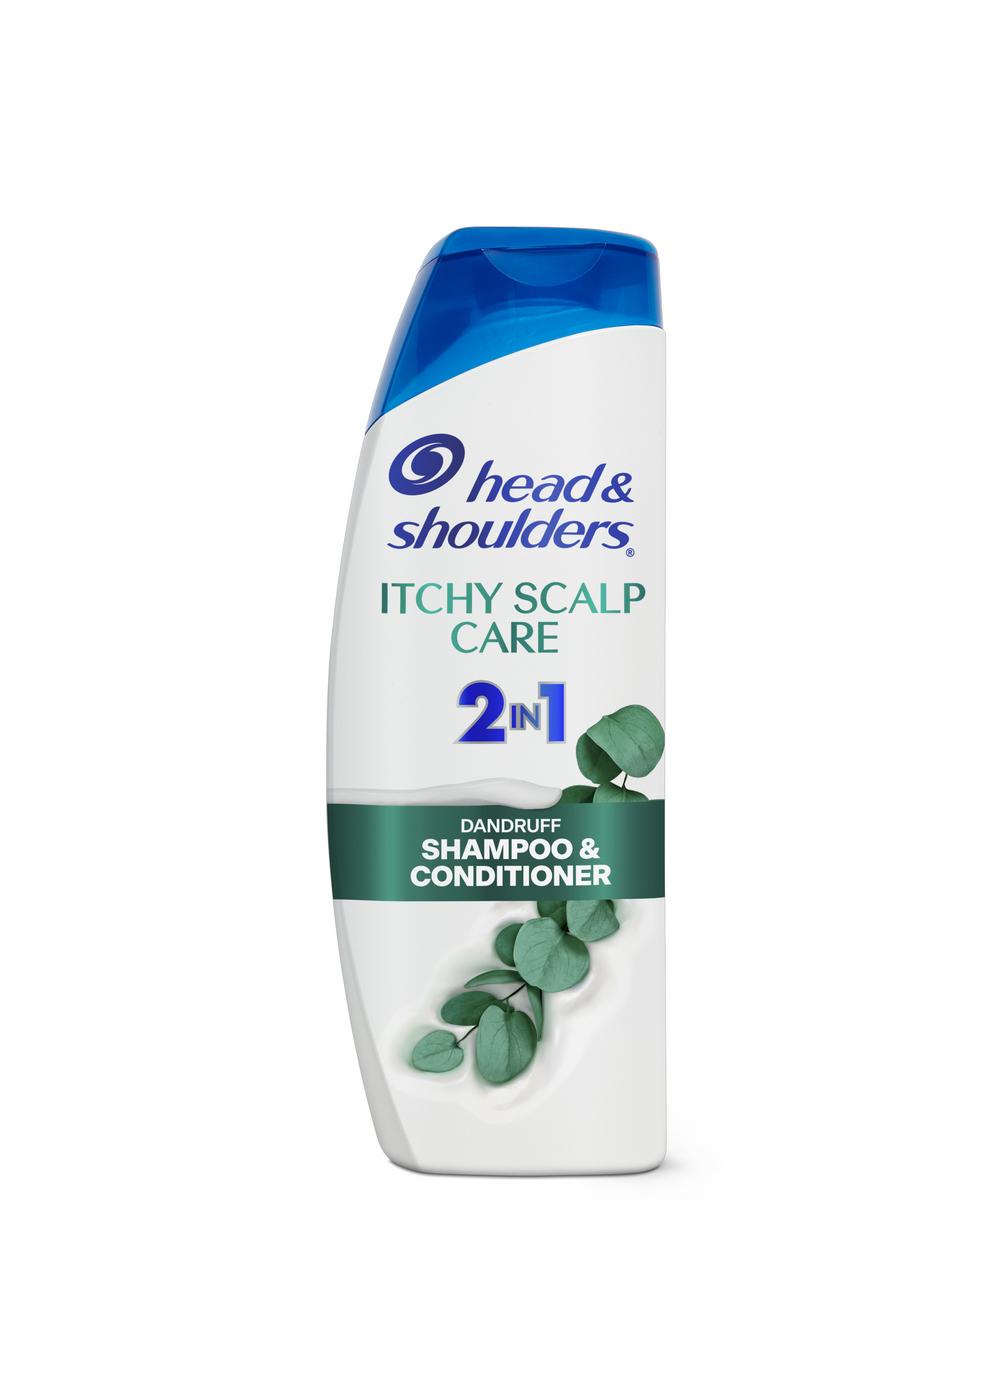 Head & Shoulders Itchy Scalp Care 2in1 Dandruff Shampoo & Conditioner ; image 1 of 11